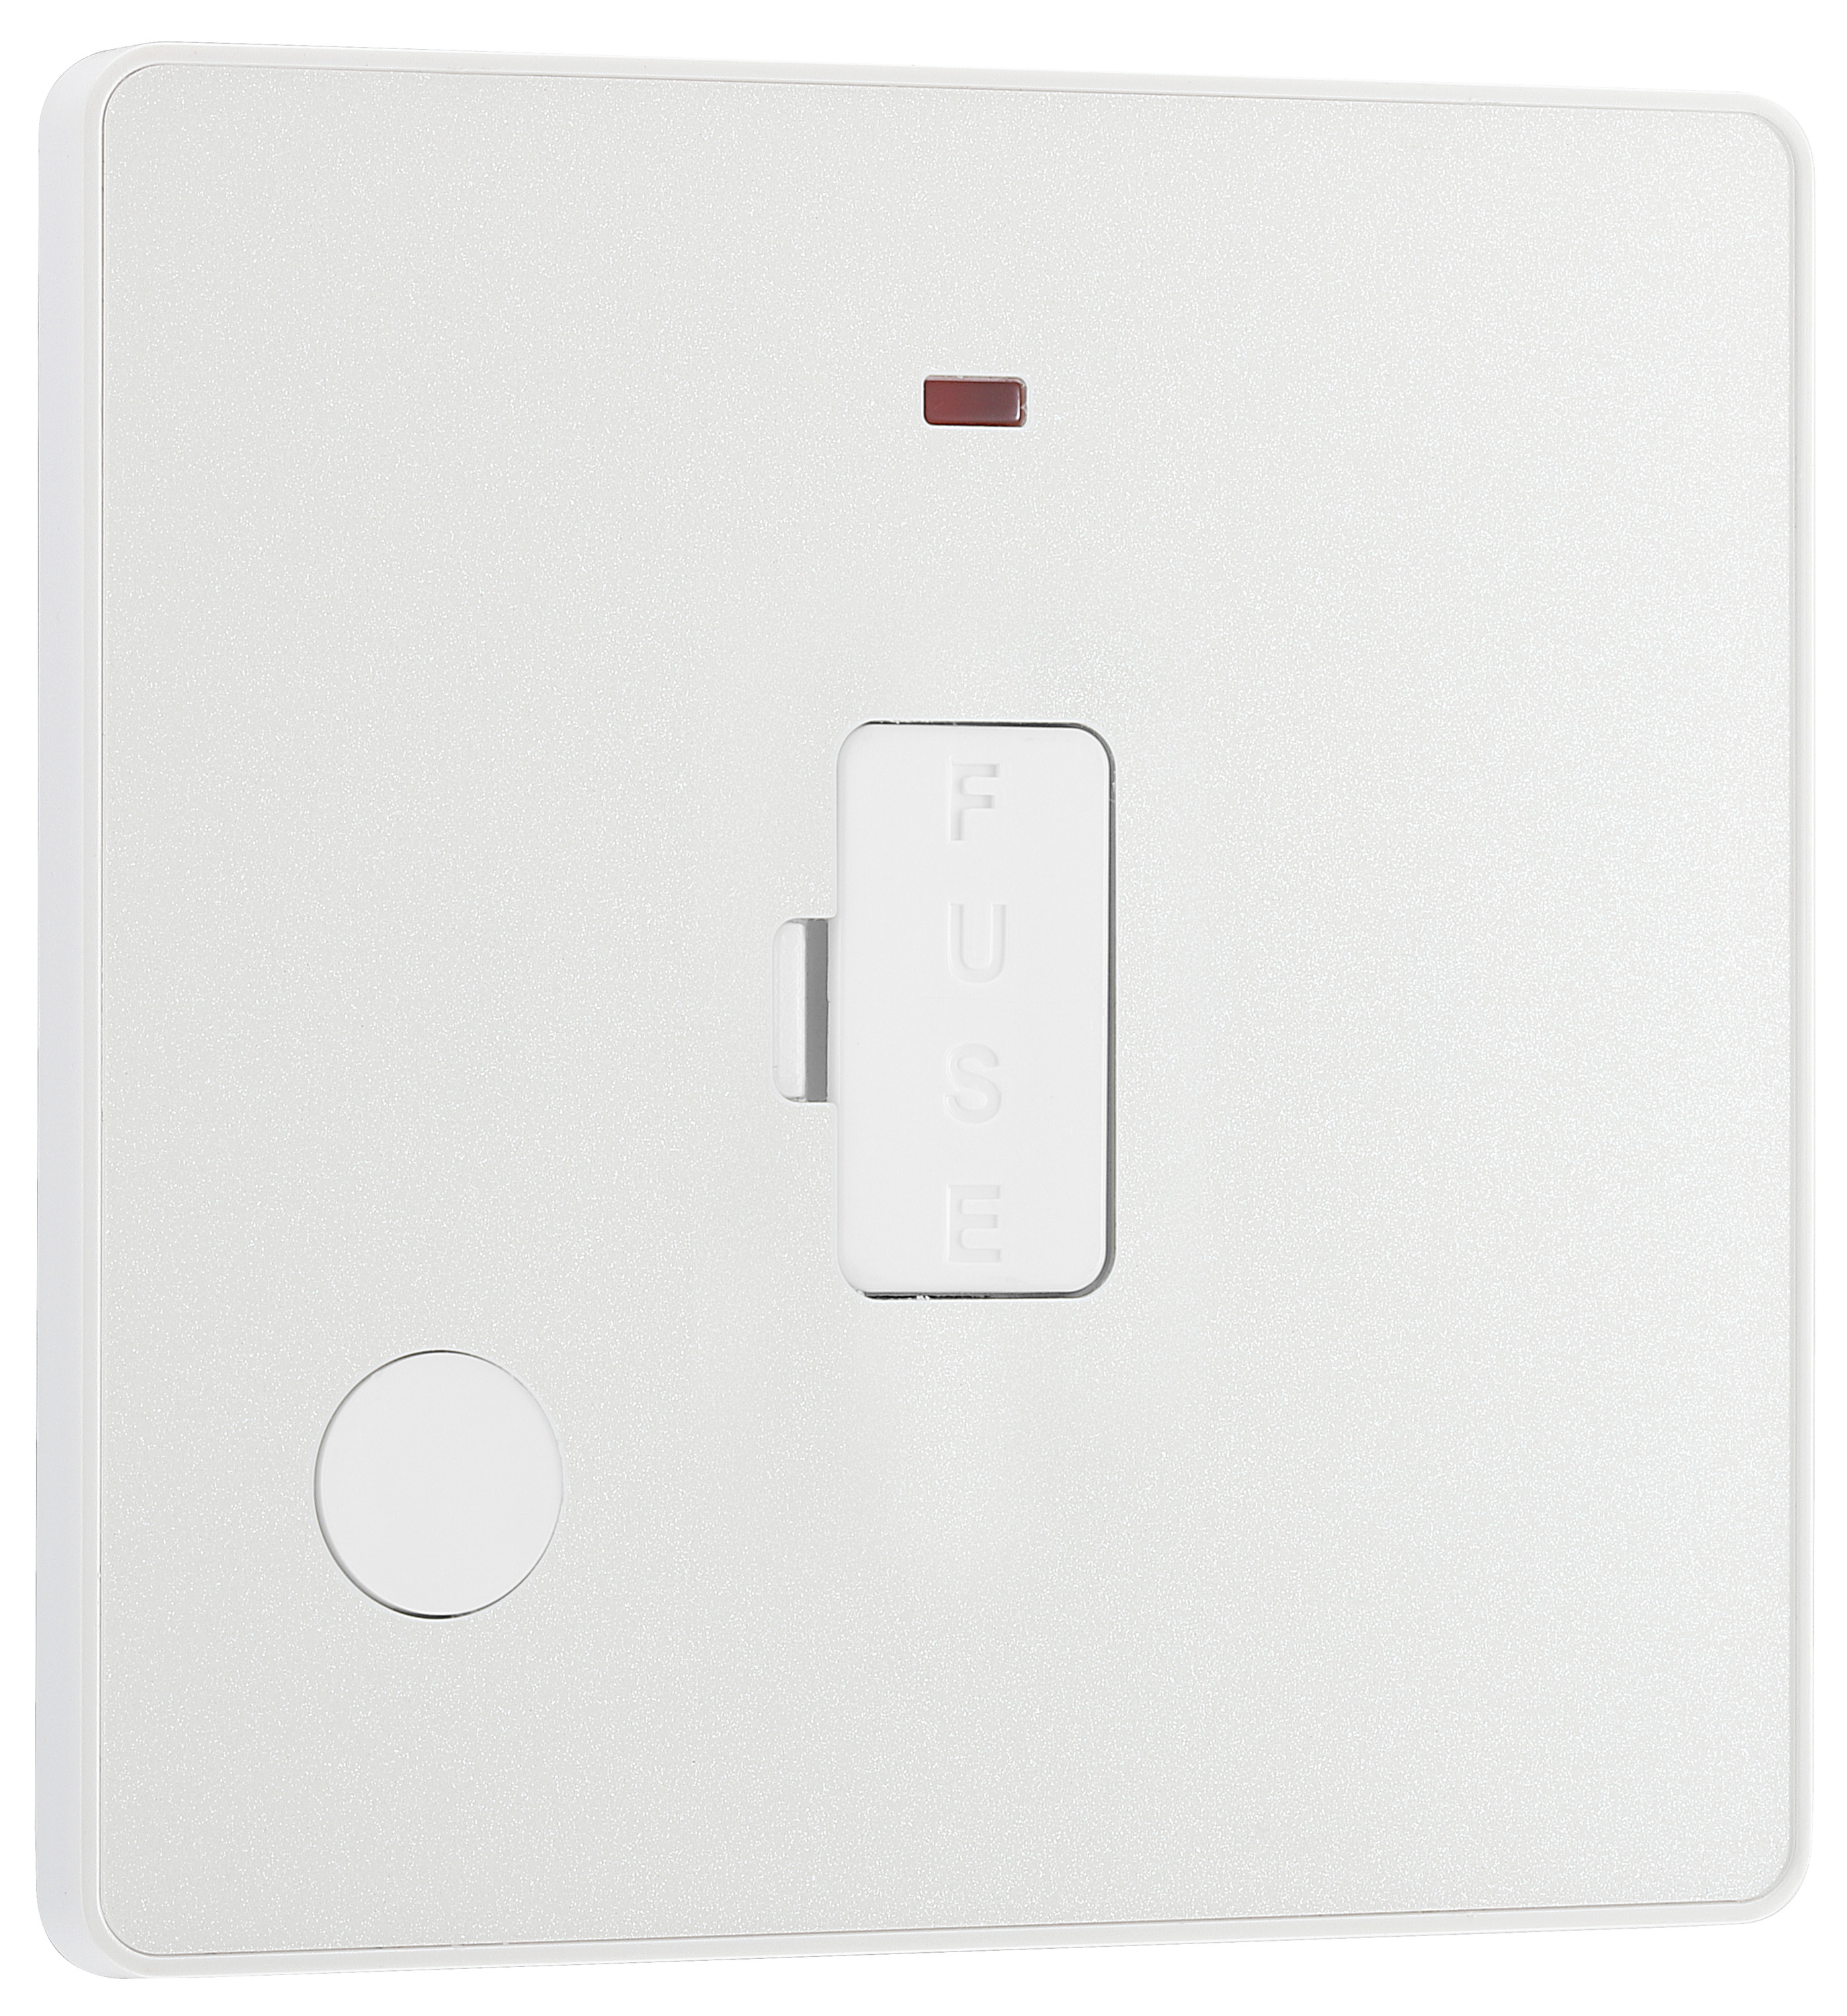 Image of BG Evolve Pearlescent White Unswitched 13A Fused Connection Unit with Power Led Indicator & Flex Outlet